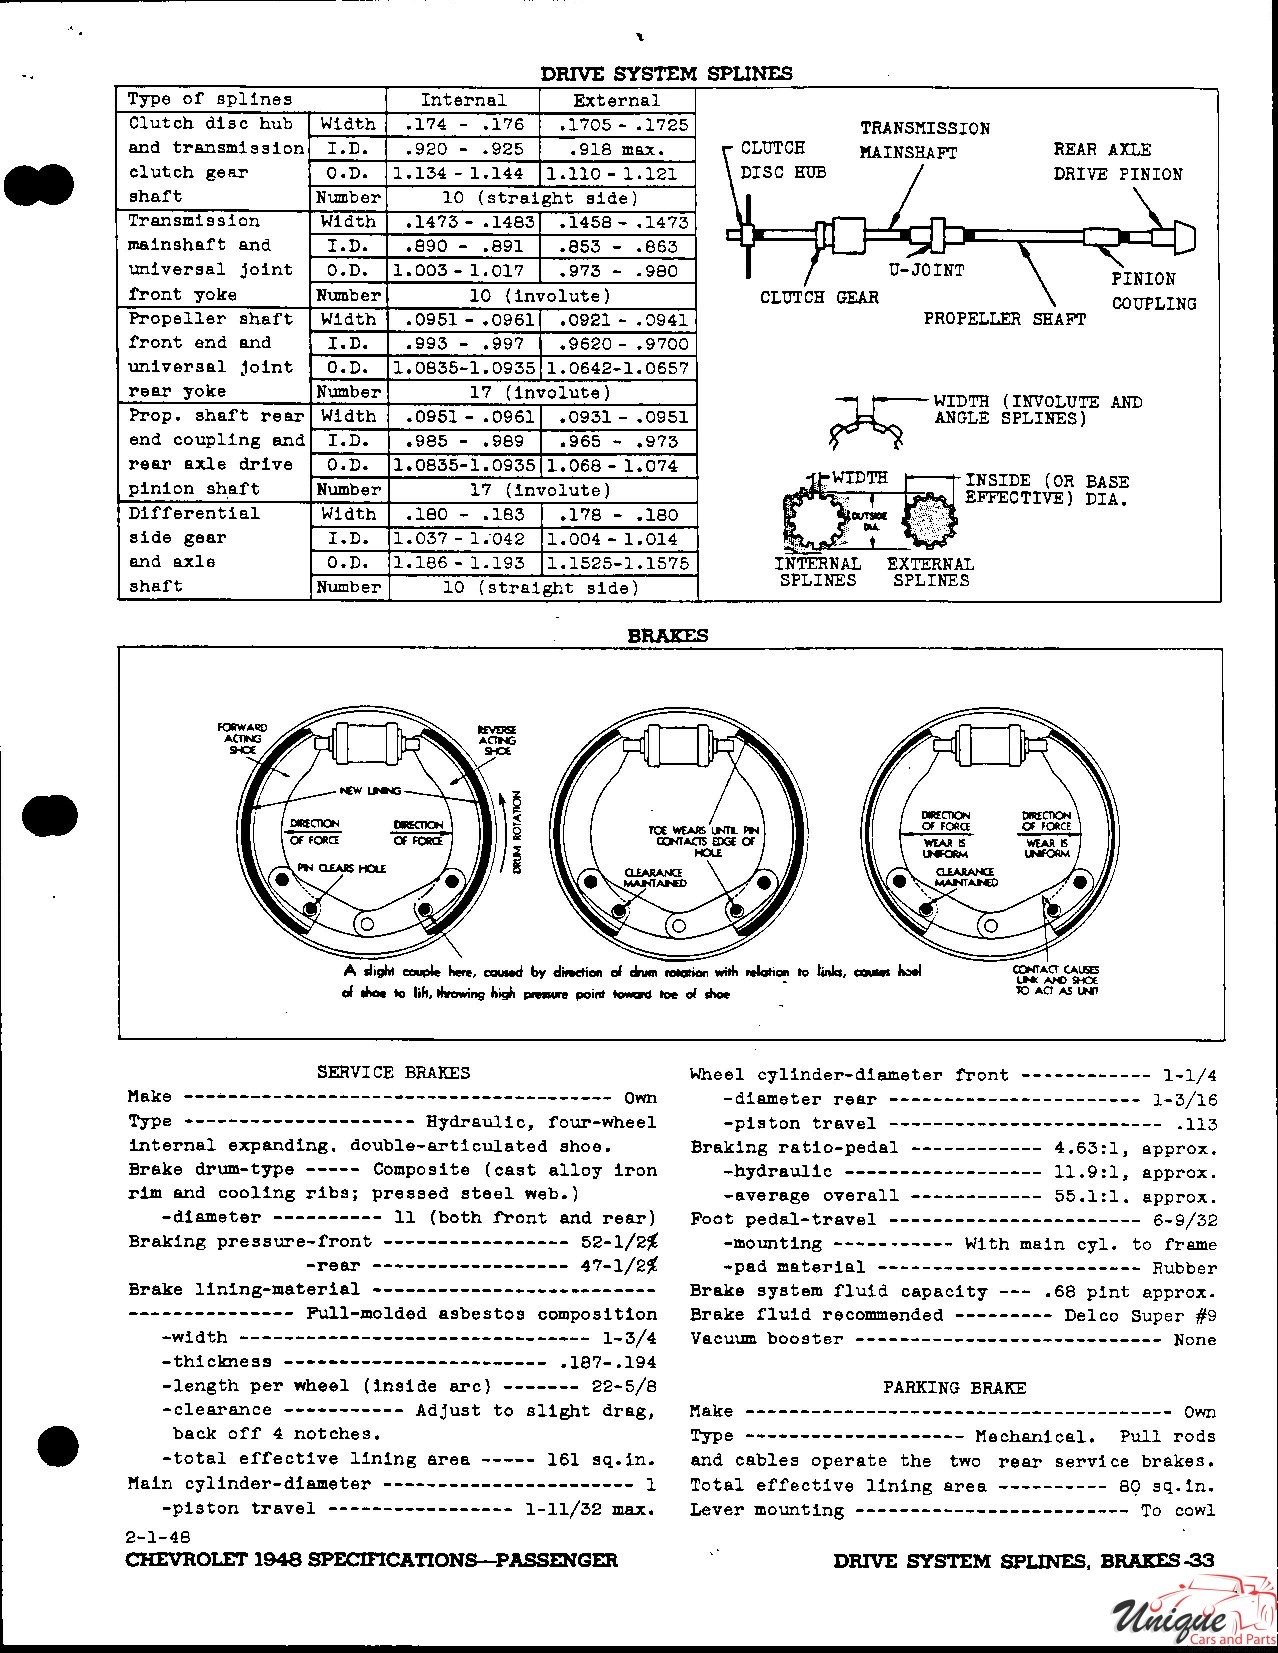 1948 Chevrolet Specifications Page 25